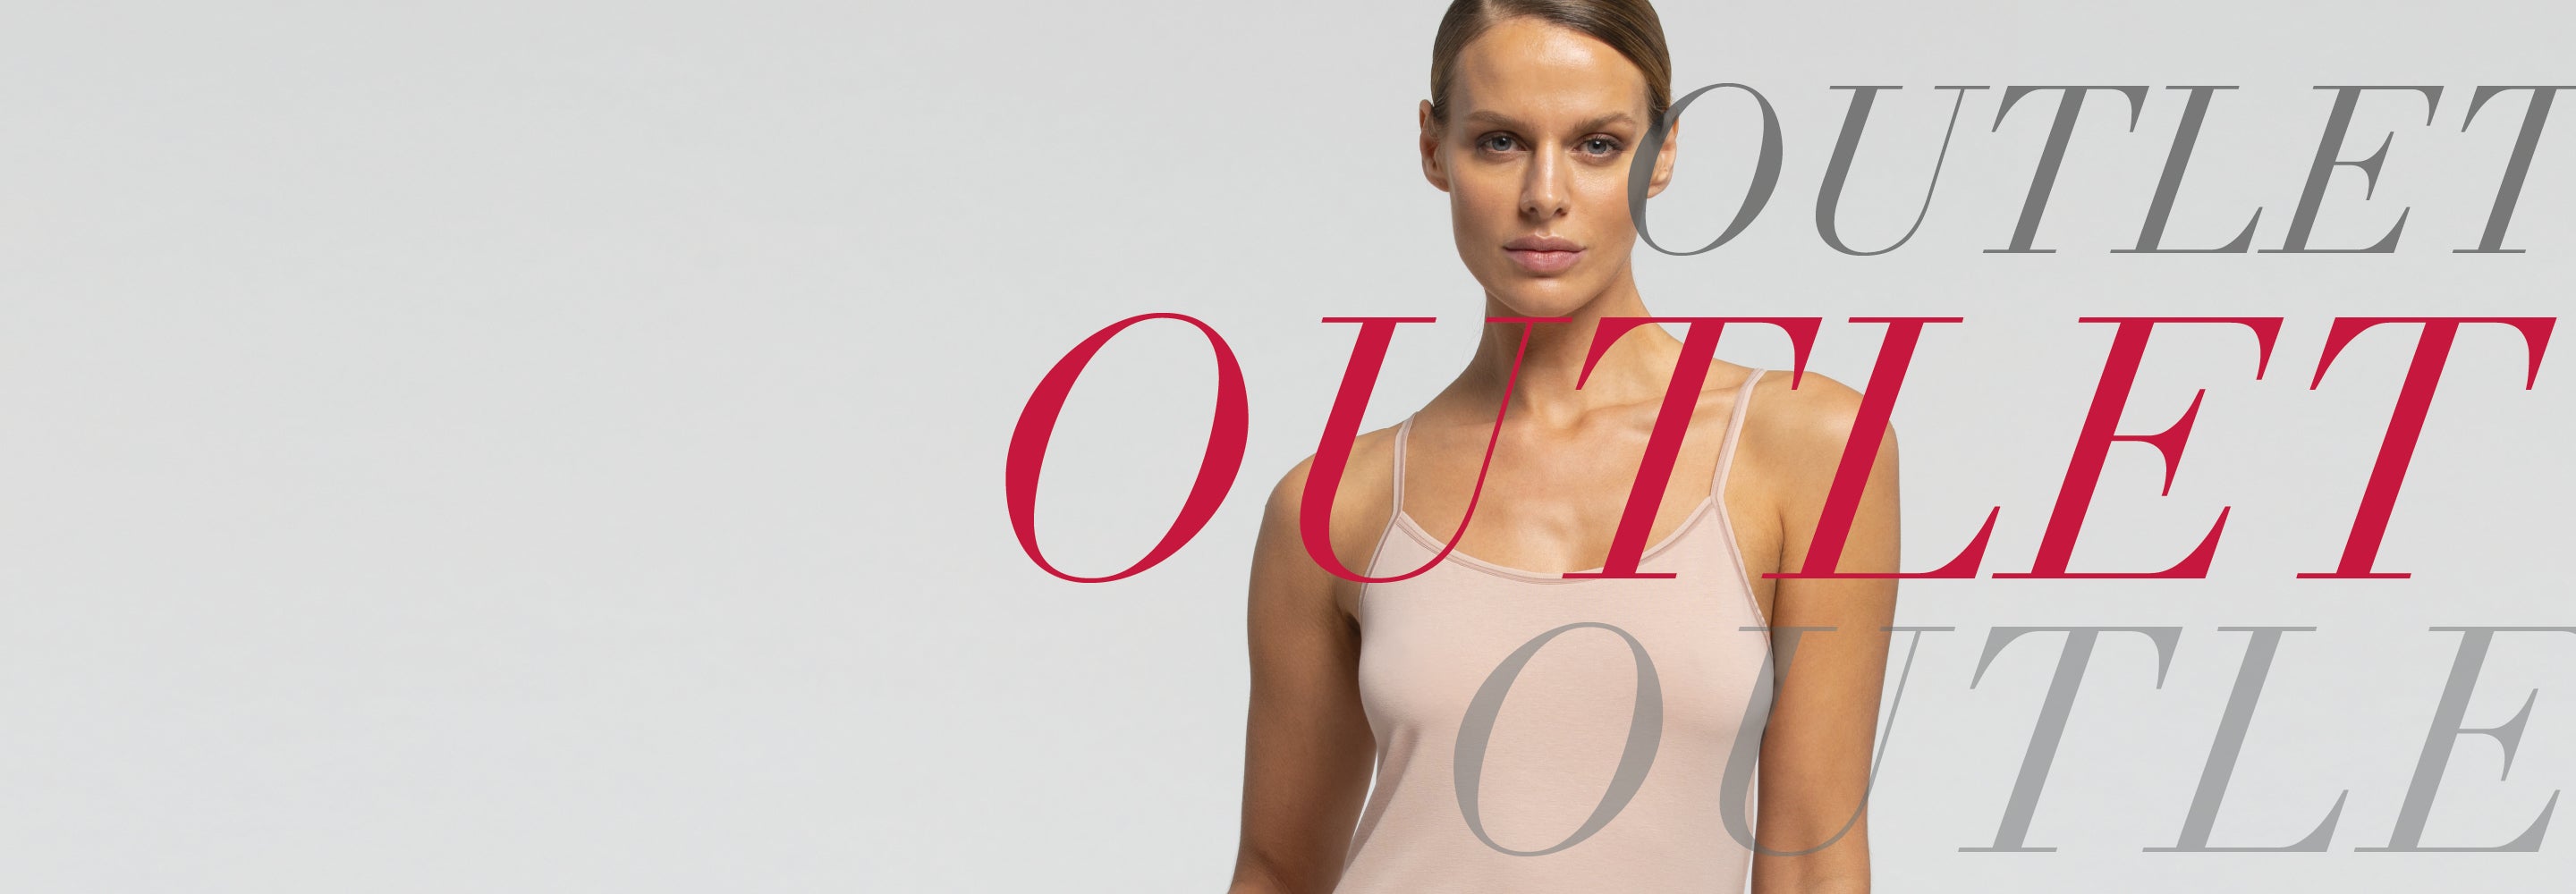 Intimo Donna Outlet